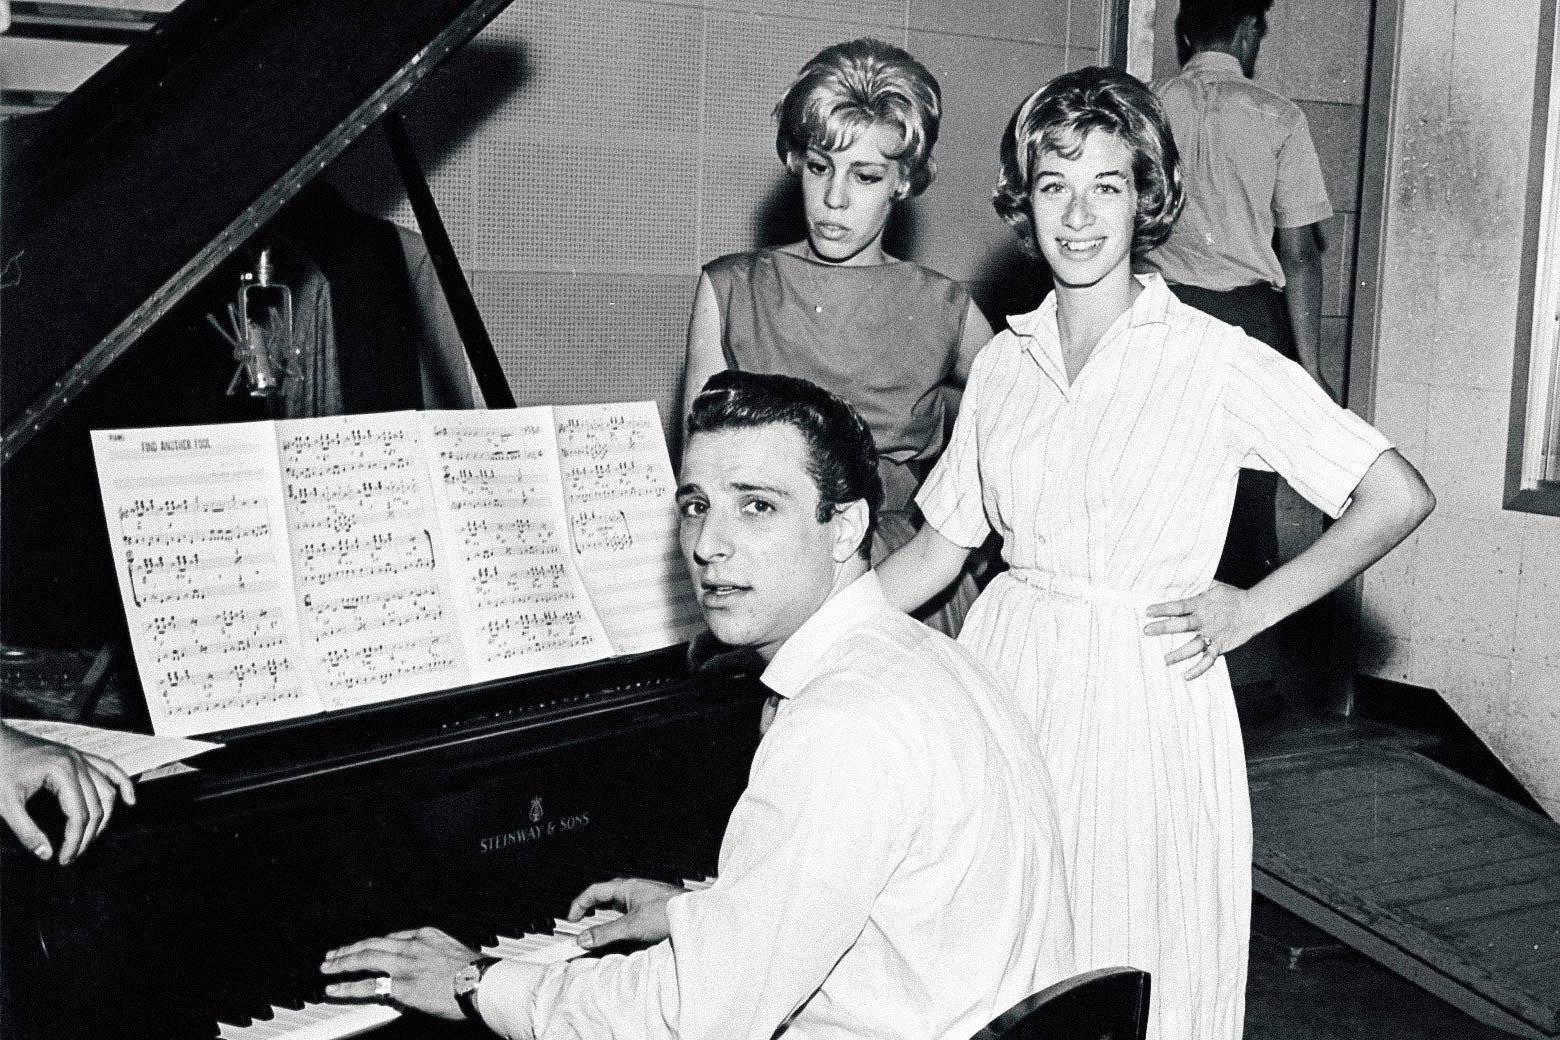 Barry Mann sitting at the piano, with Cynthia Weil and Carole King standing next to him.